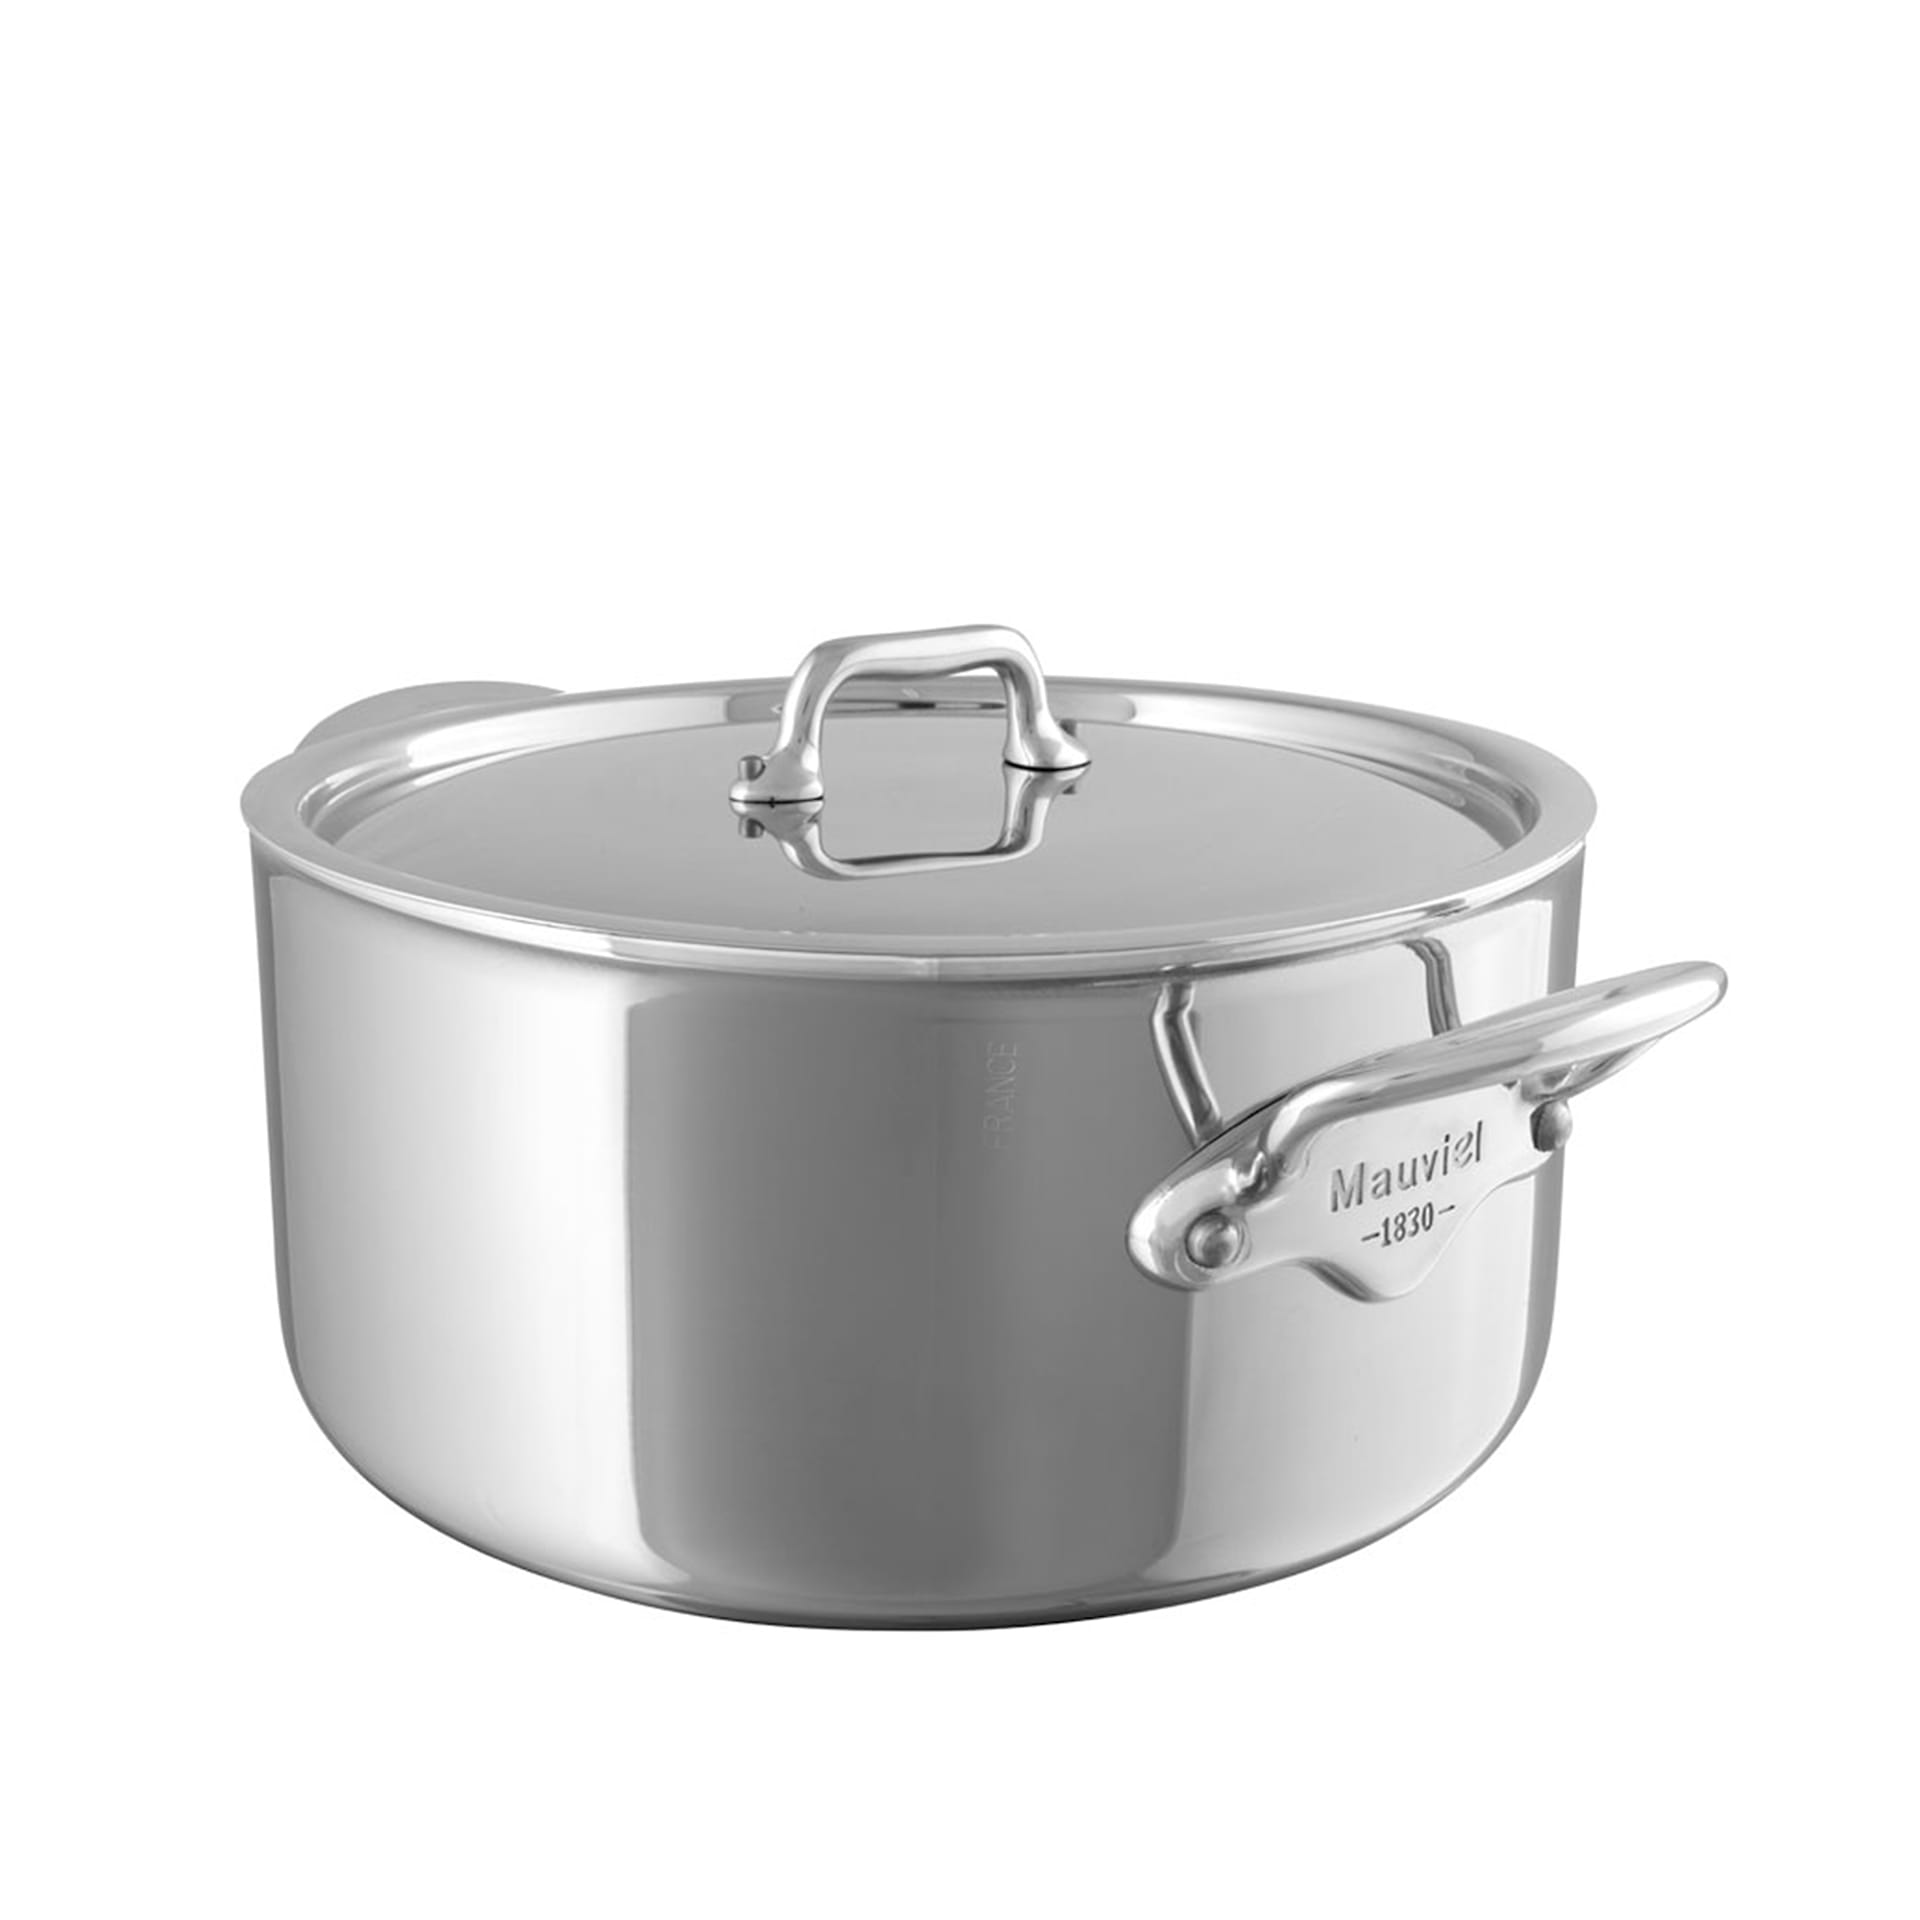 Pot With Lid Cook Style Steel - 5,9 L - Mauviel - NO GA